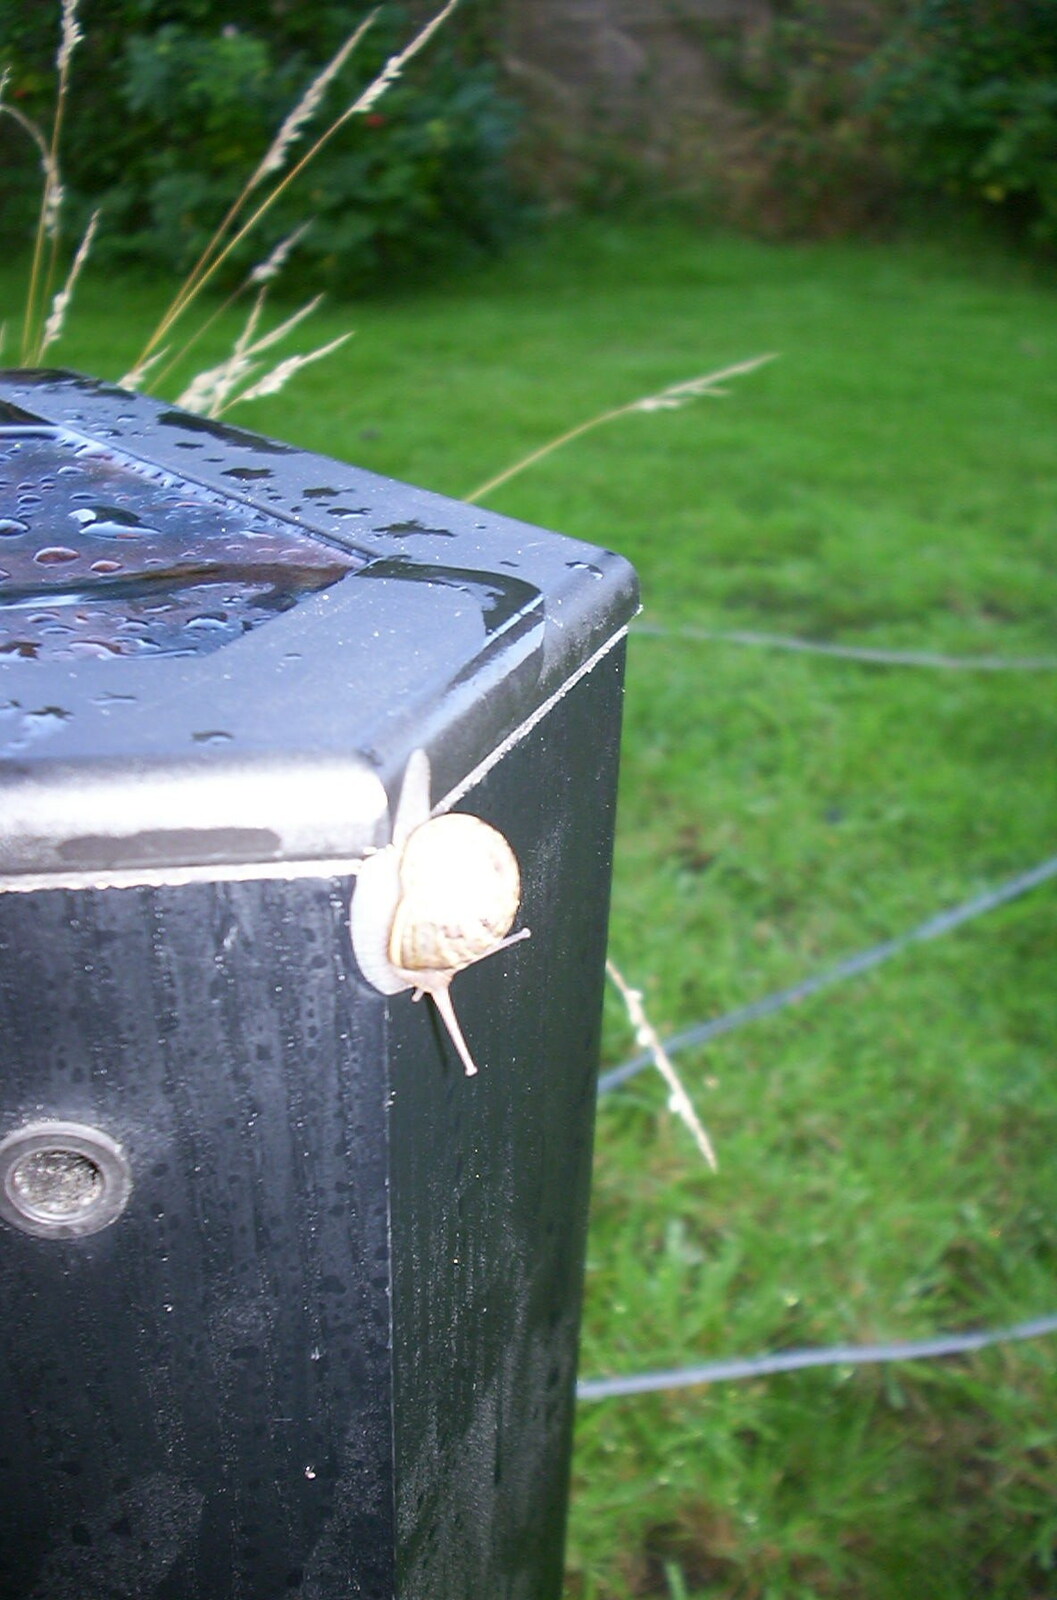 There's a snail stuck to a speaker in the garden from Nosher's BSCC Barbeque, Brome, Suffolk - 3rd August 2002